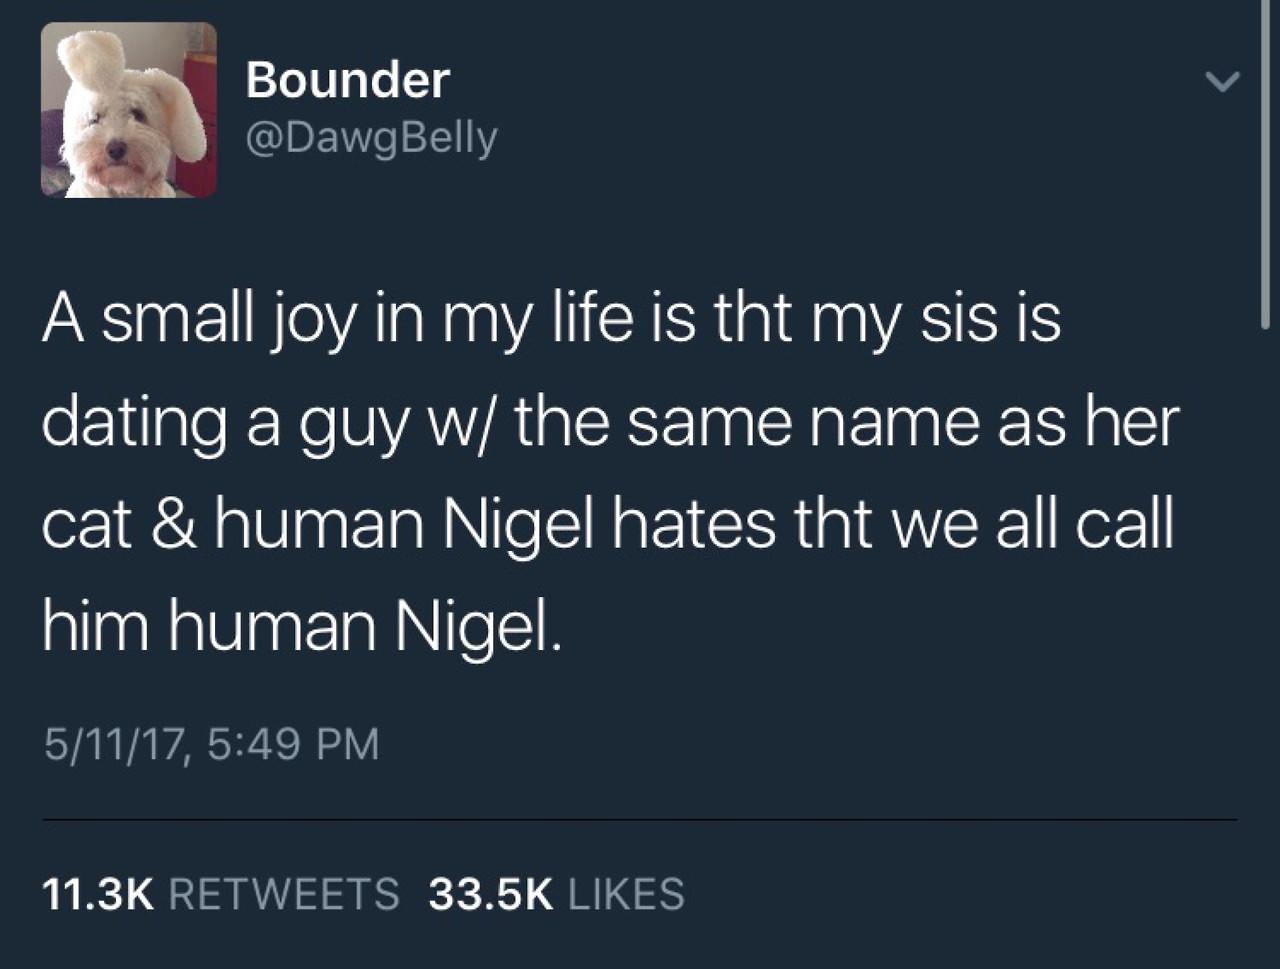 Tweet of some who has a sister dating a guy with the same name as the cat, Nigel.